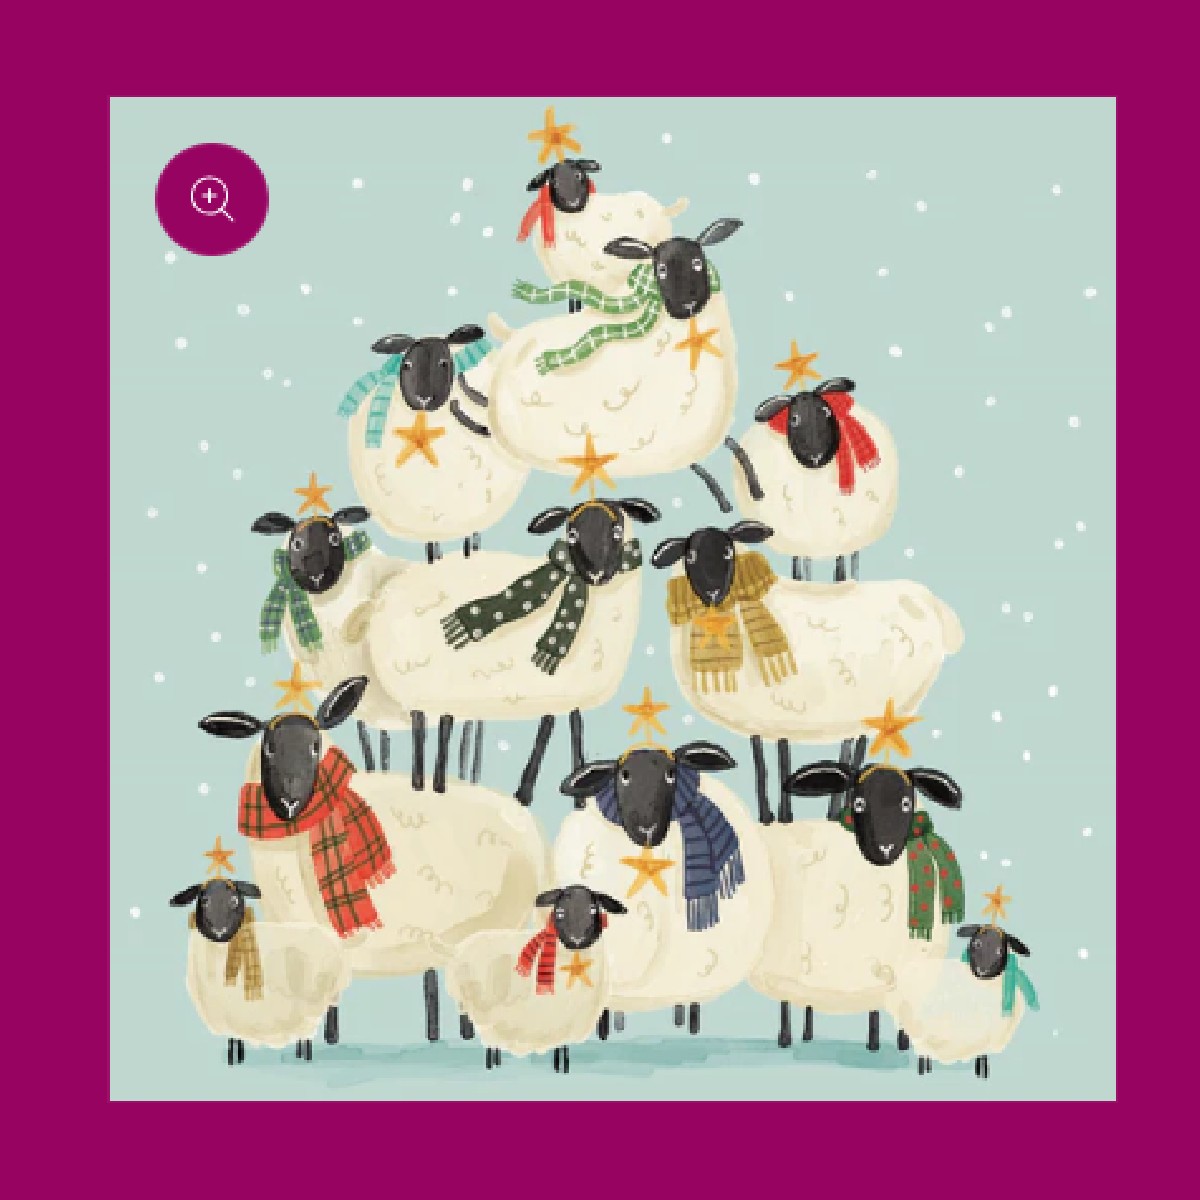 Mencap's 2023 Christmas Cards are on sale! Each pack of 10 cards costs only £3.50 each (plus postage) and every purchase will help make a difference to the lives of people with a learning disability. 🎄 Purchase yours today: mencapretail.myshopify.com